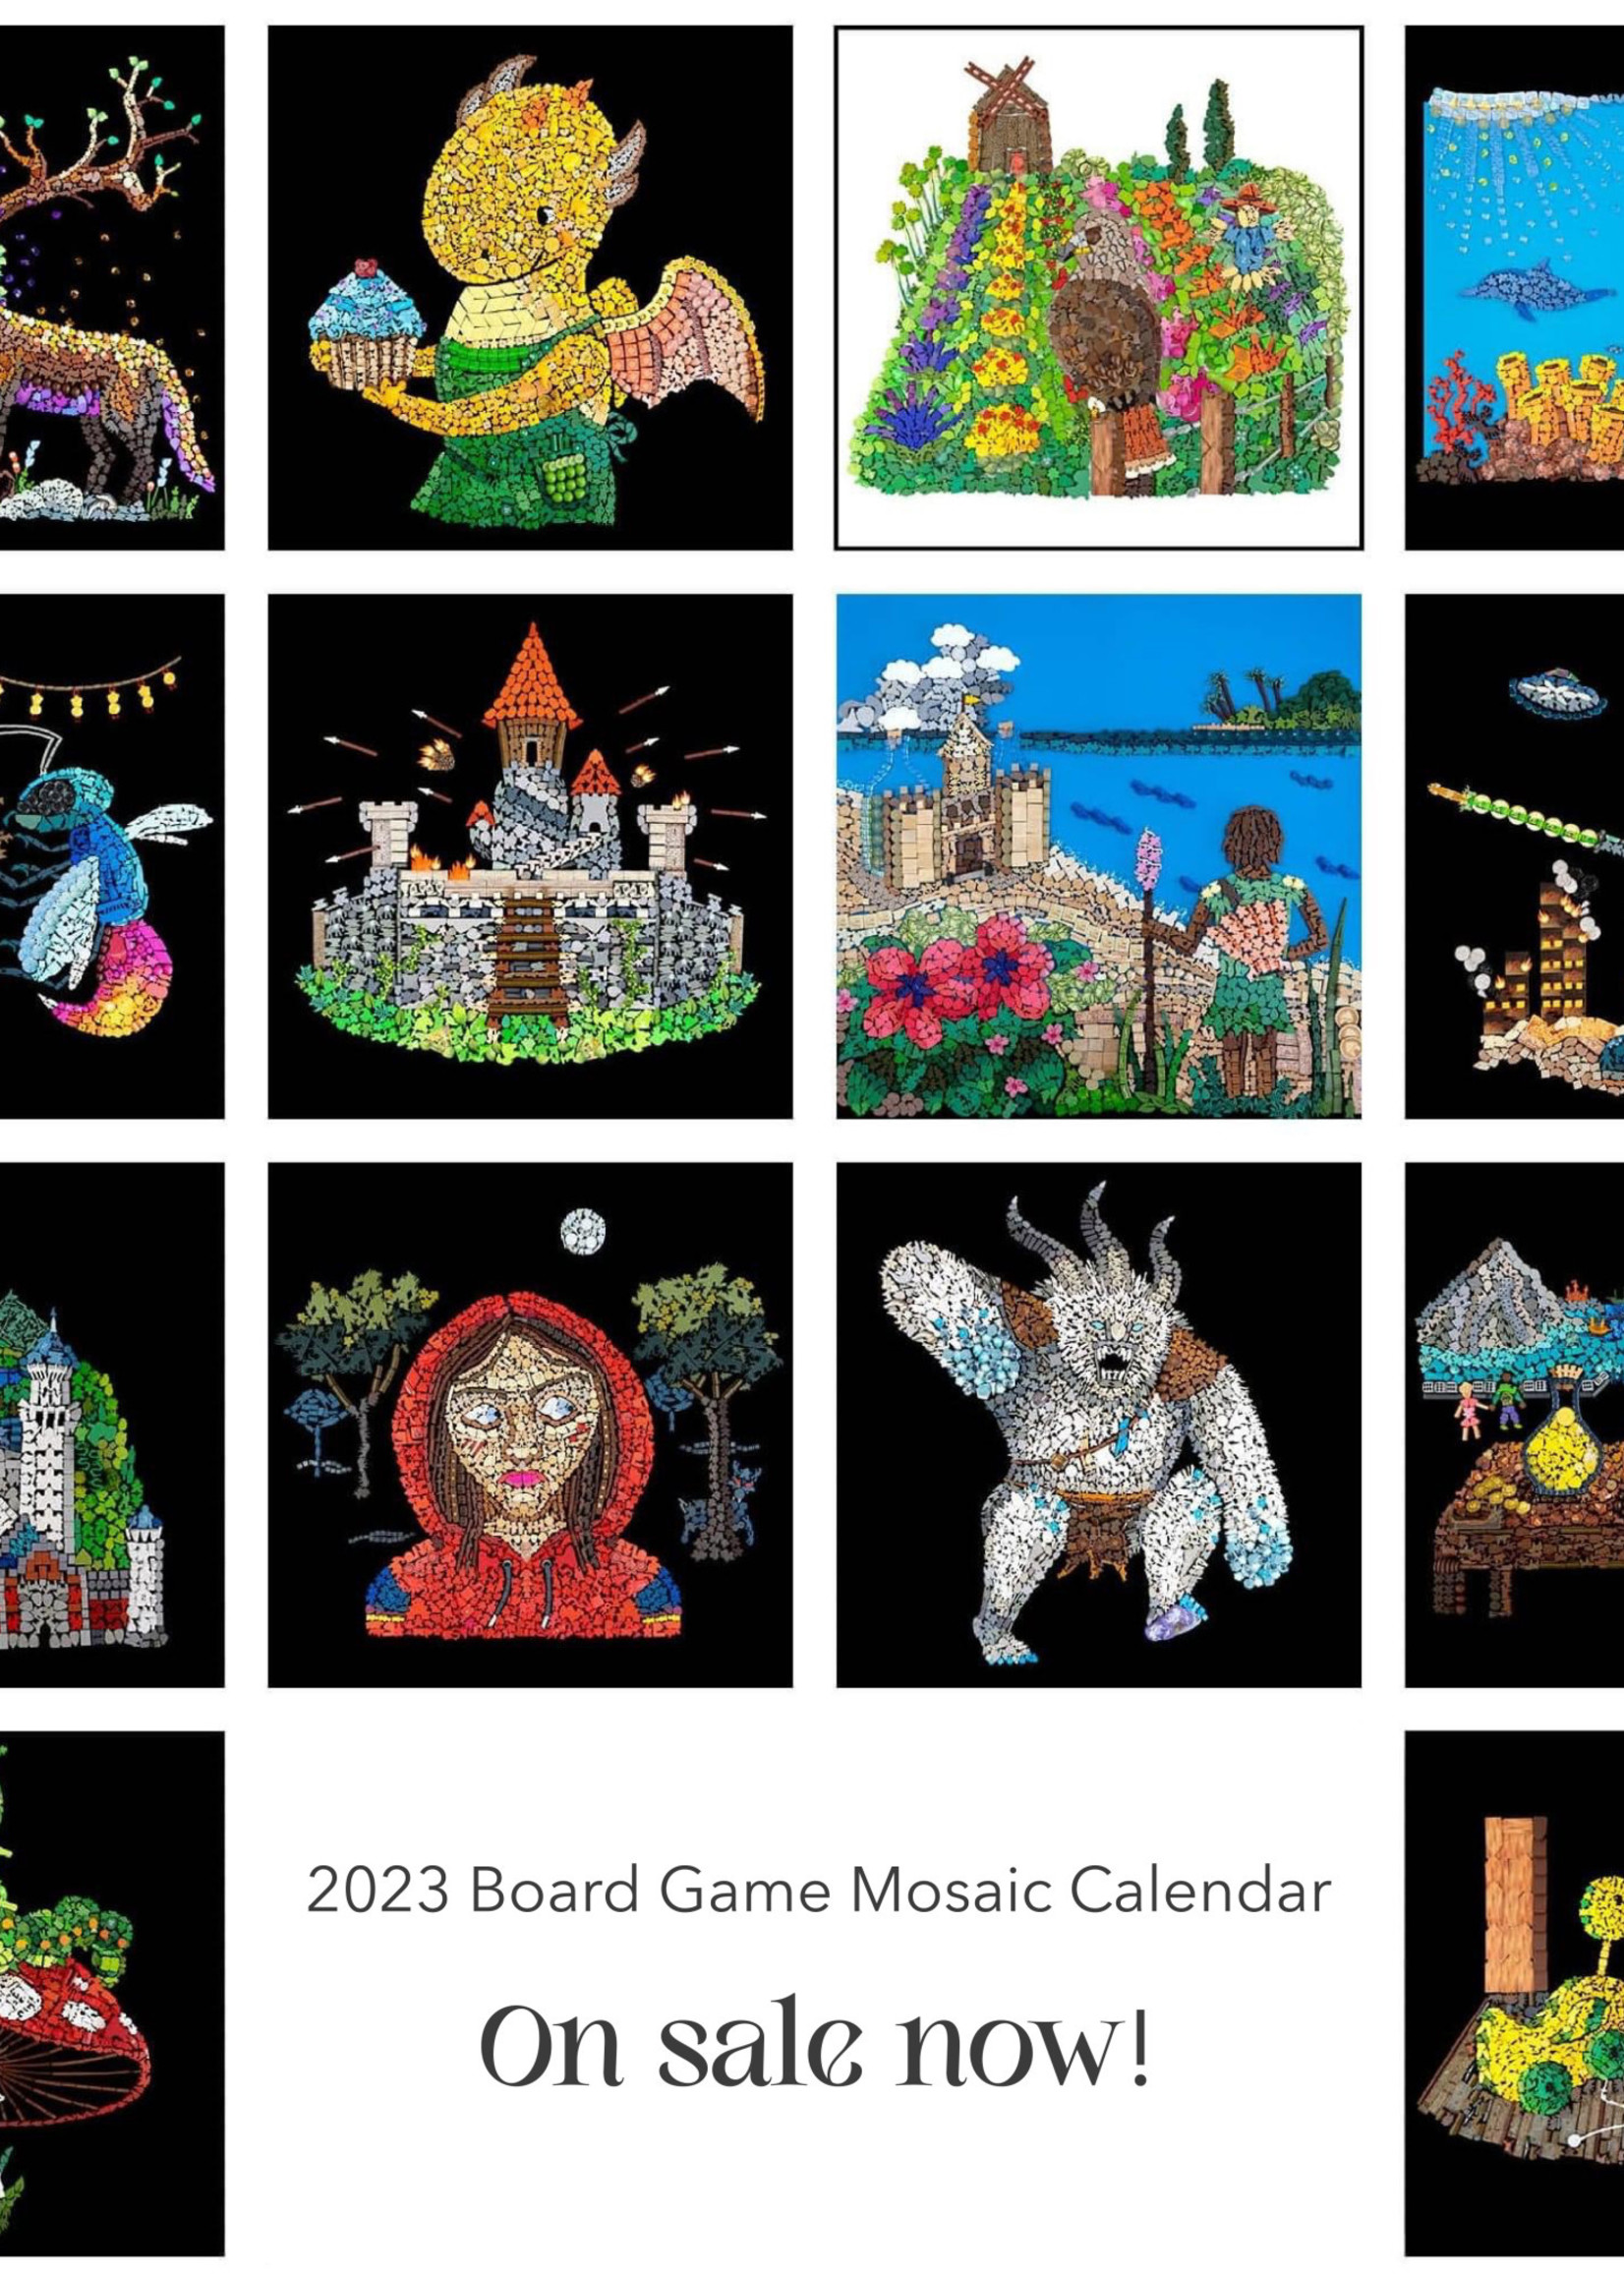 Board Game Mosaic Calendar 2023 The Guilded Grayland